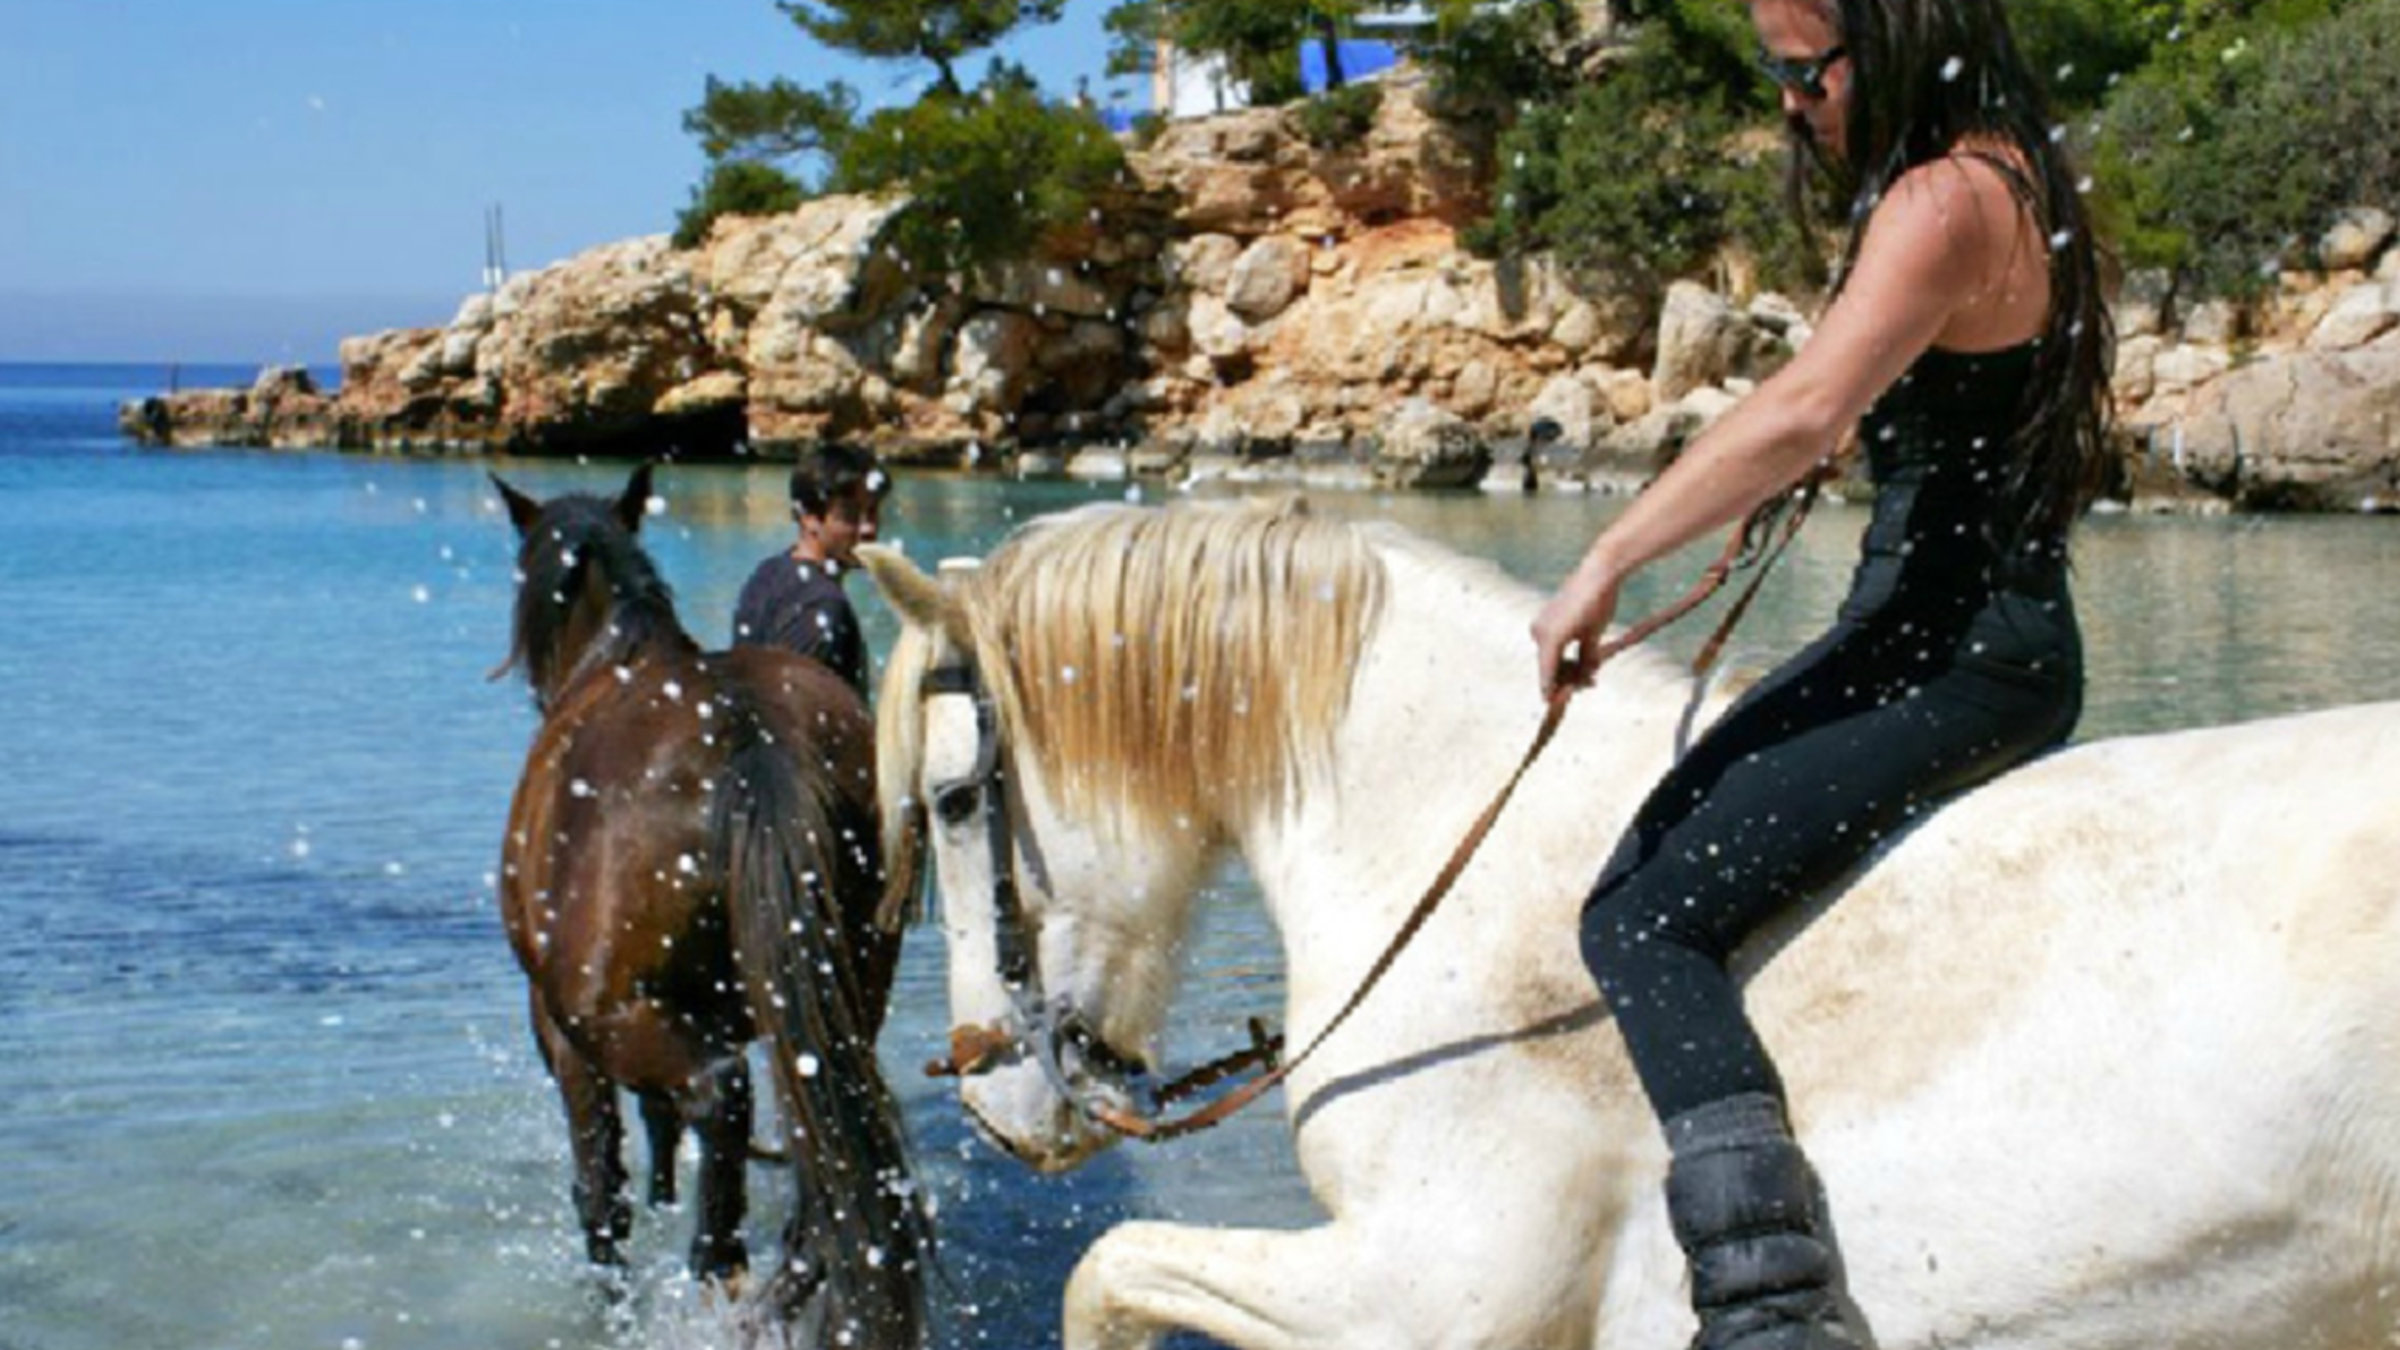 Horse Rides In The Sea